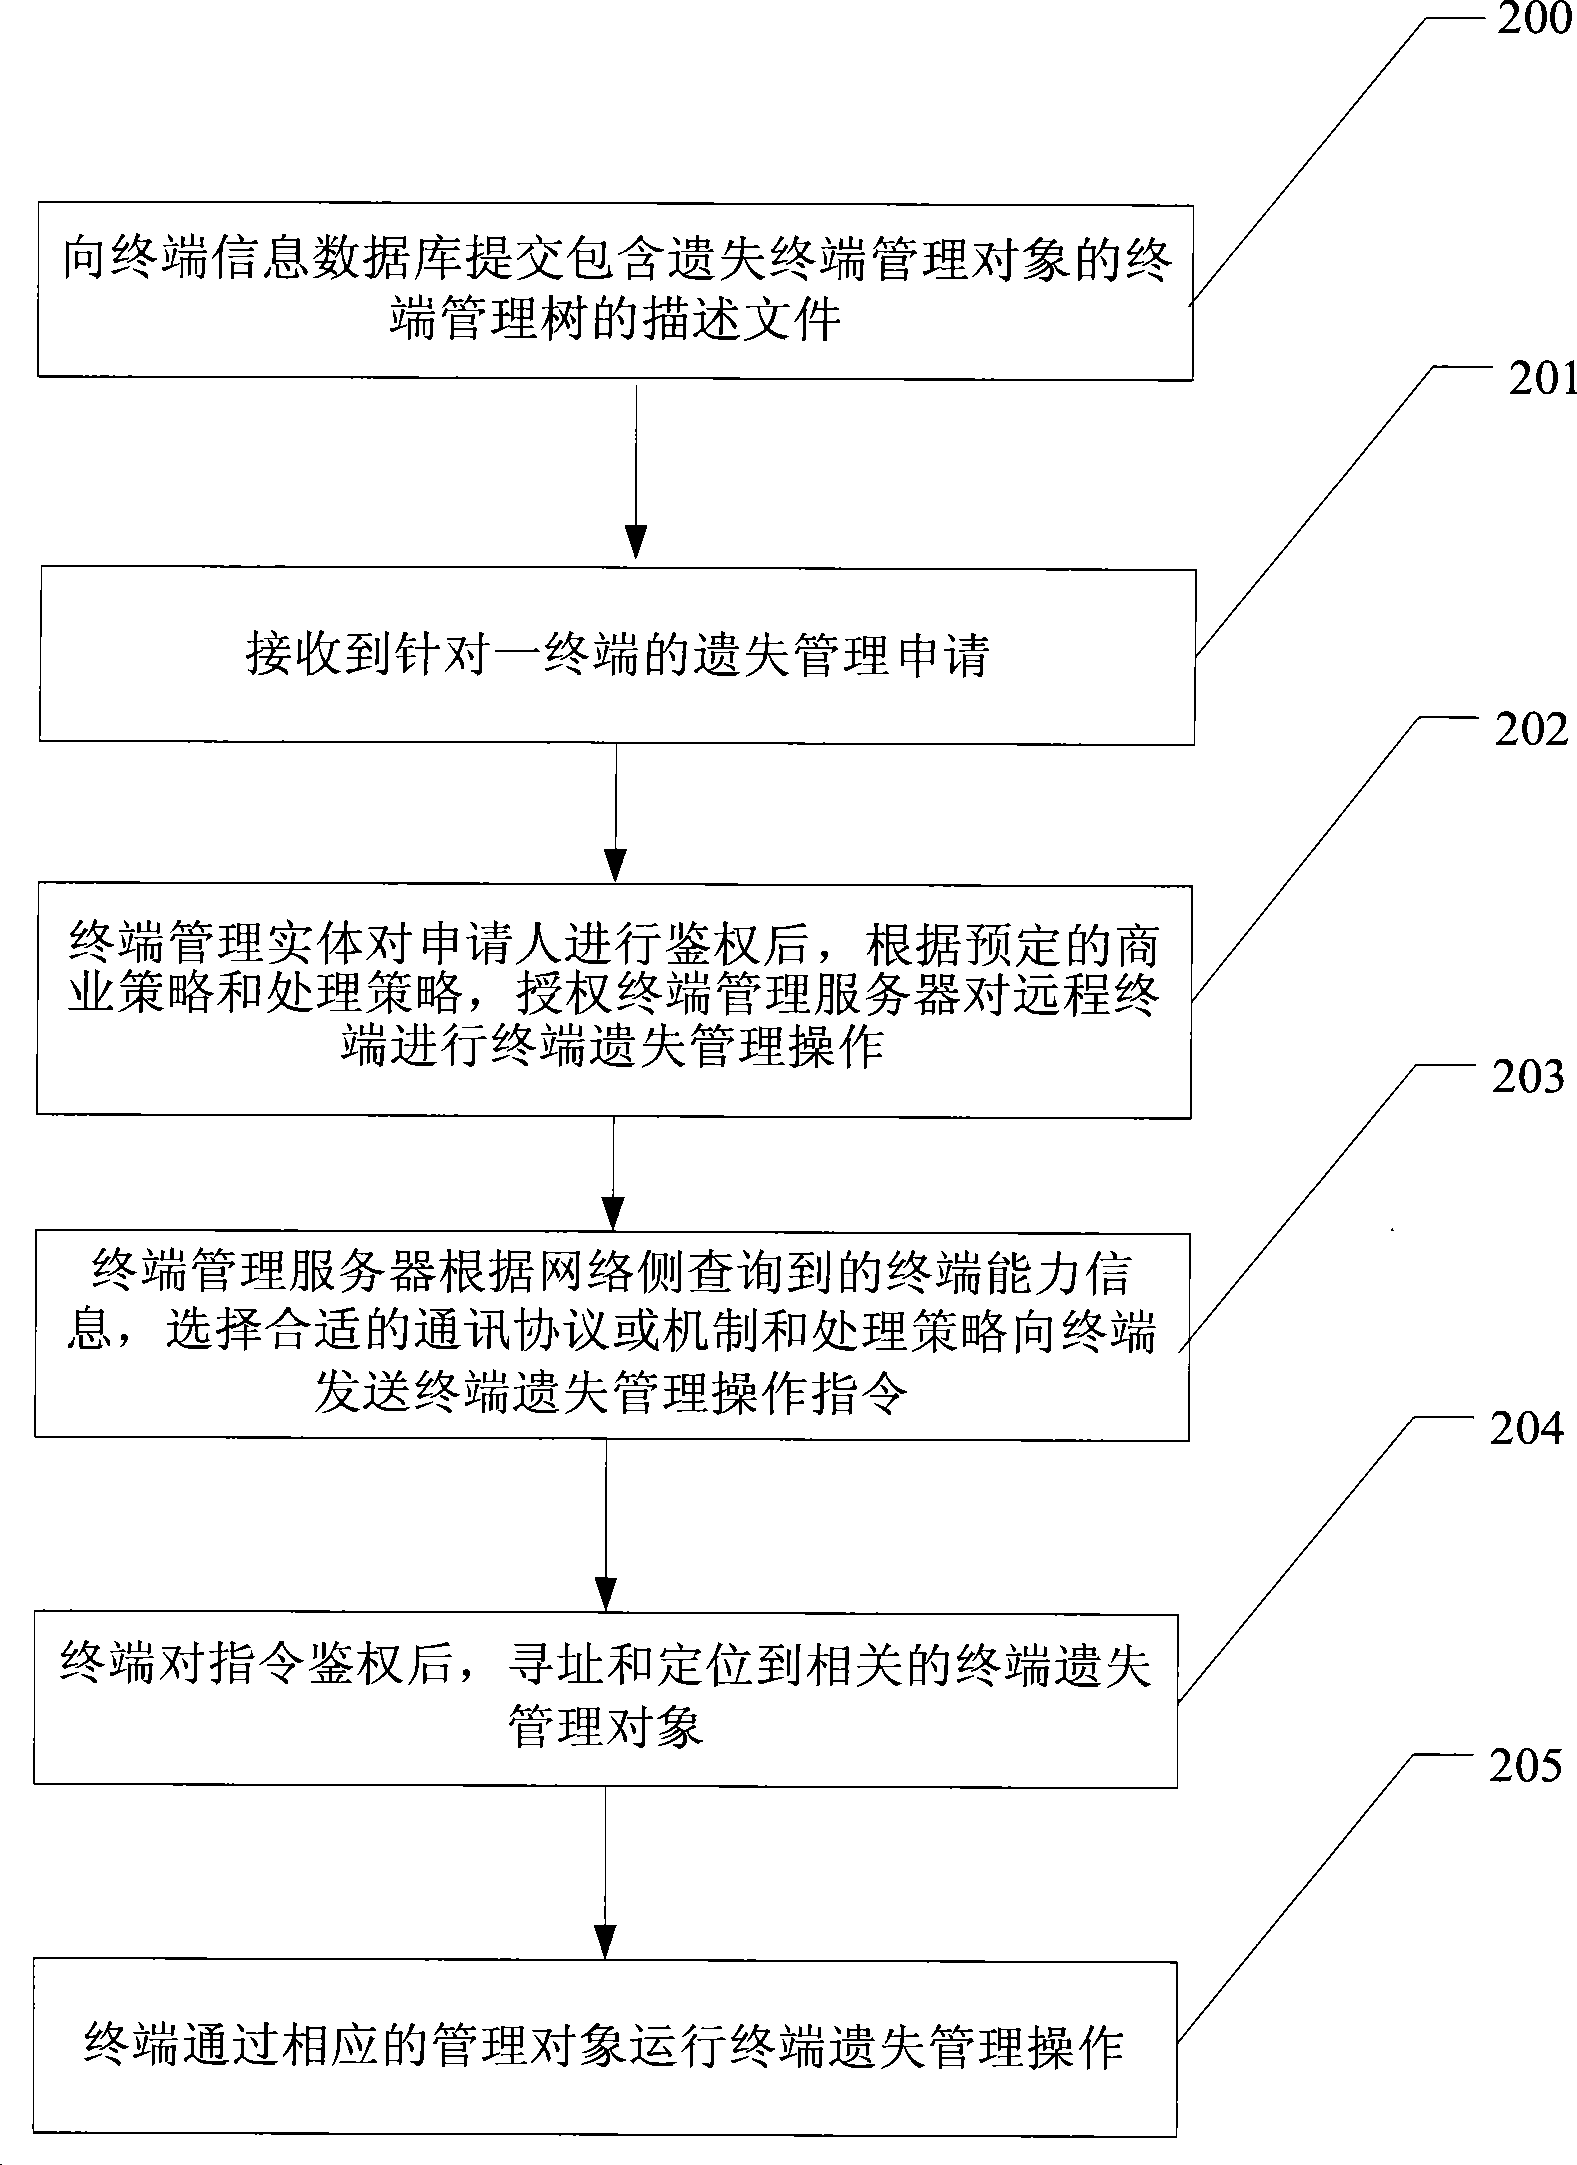 Method and system for managing terminal loss